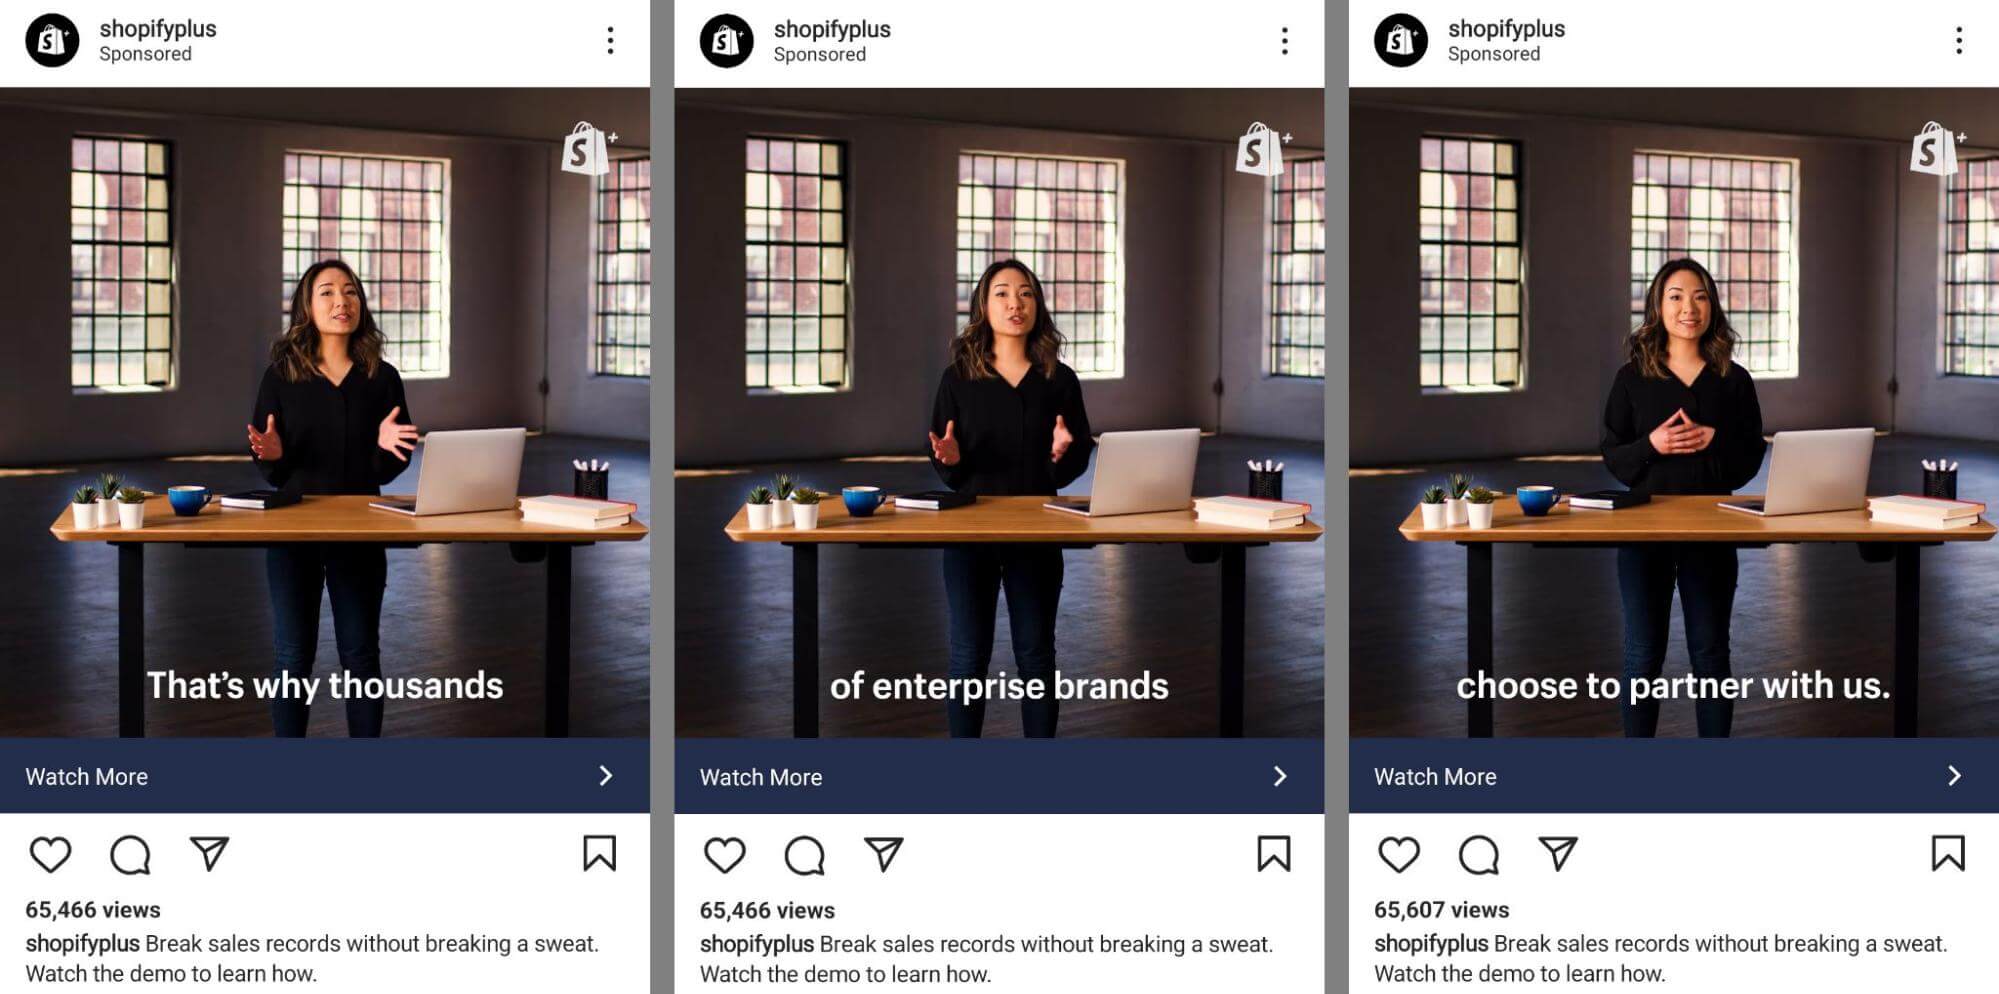 advertising-campaigns-how-to-use-social-proof-in-instagram-ads-embedded-captions-shopifyplus-example-10